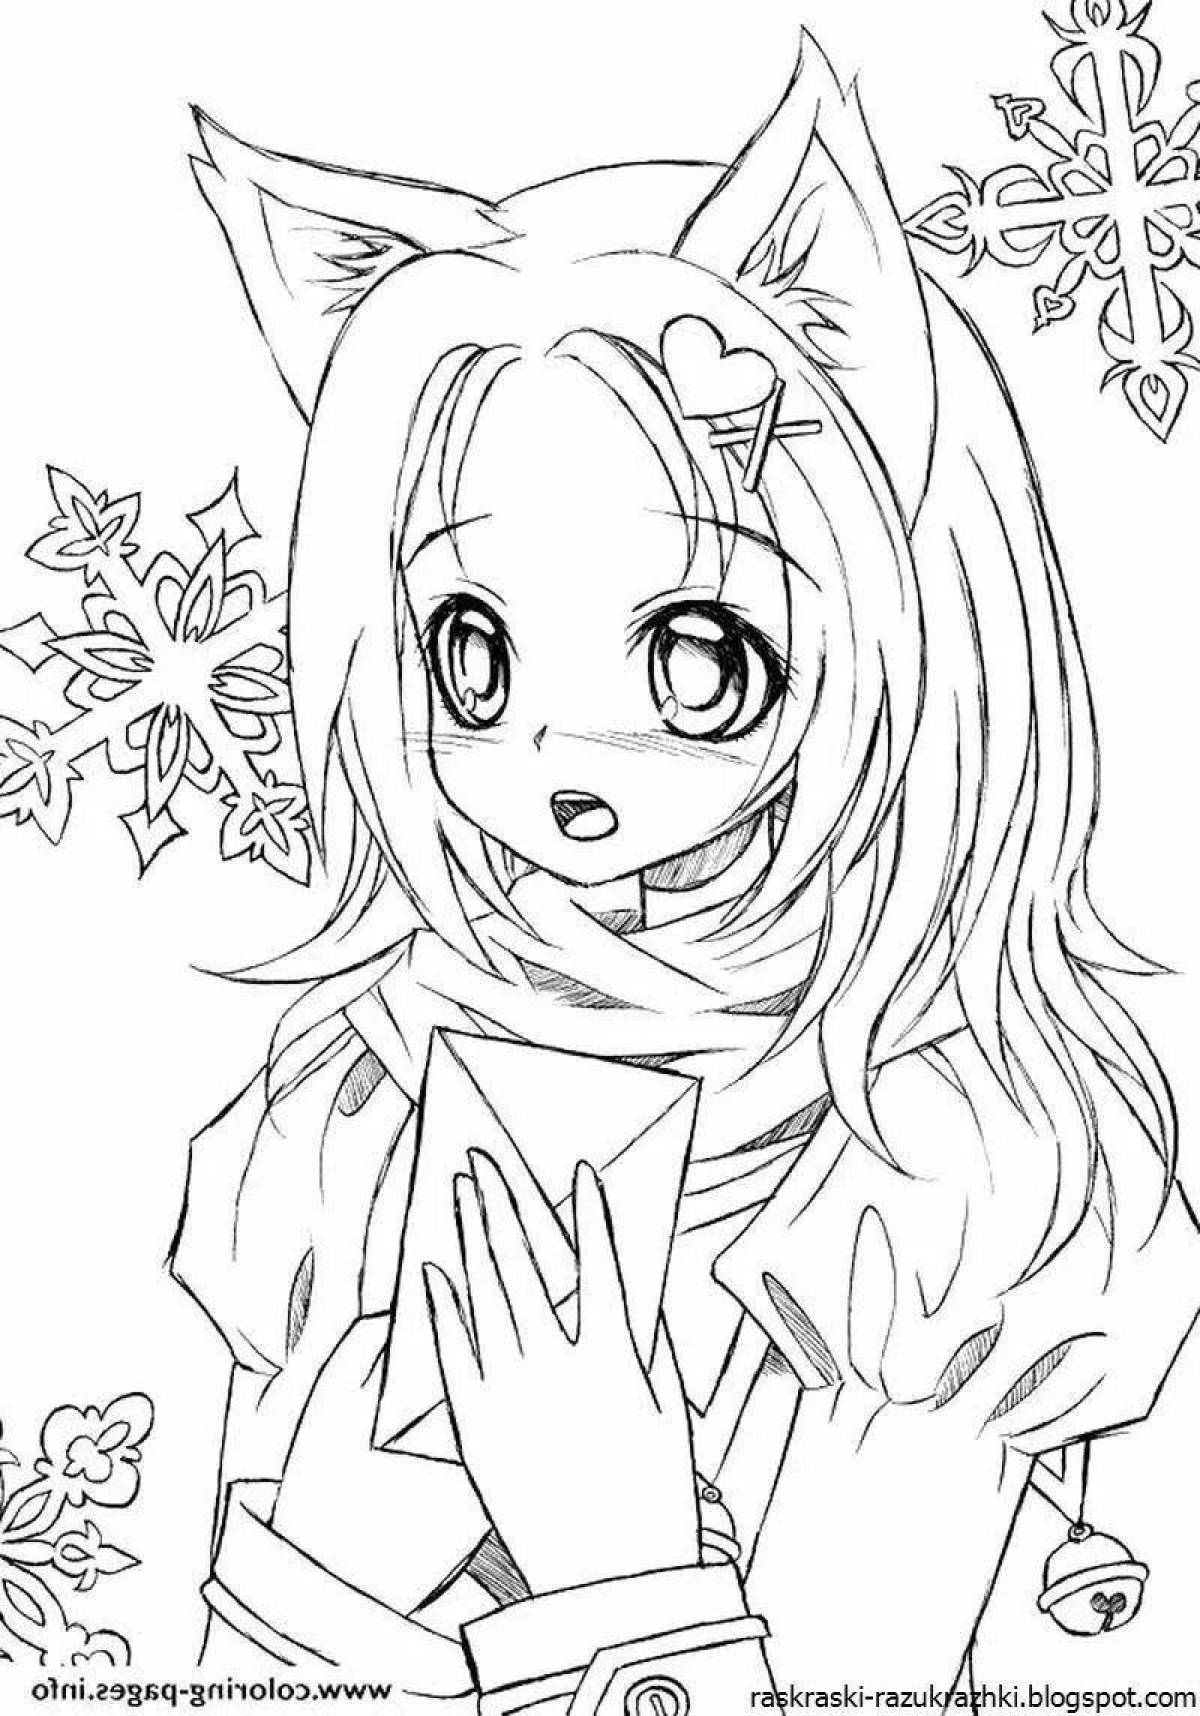 Animated 15 year old anime girls coloring book